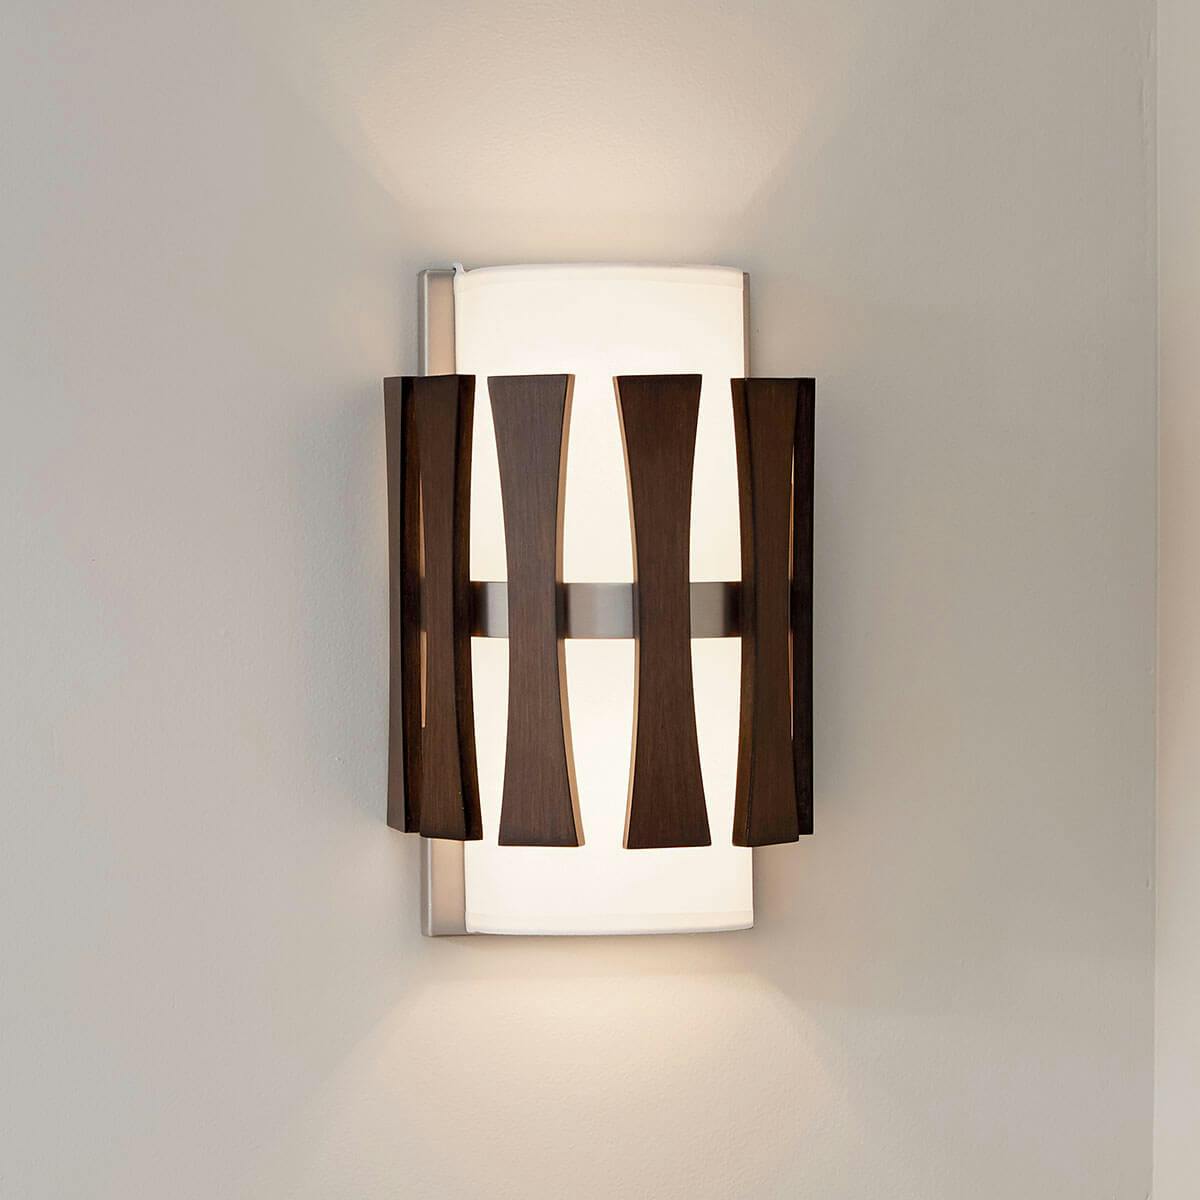 Day time Hallway image featuring Cirus wall sconce 43756AUB